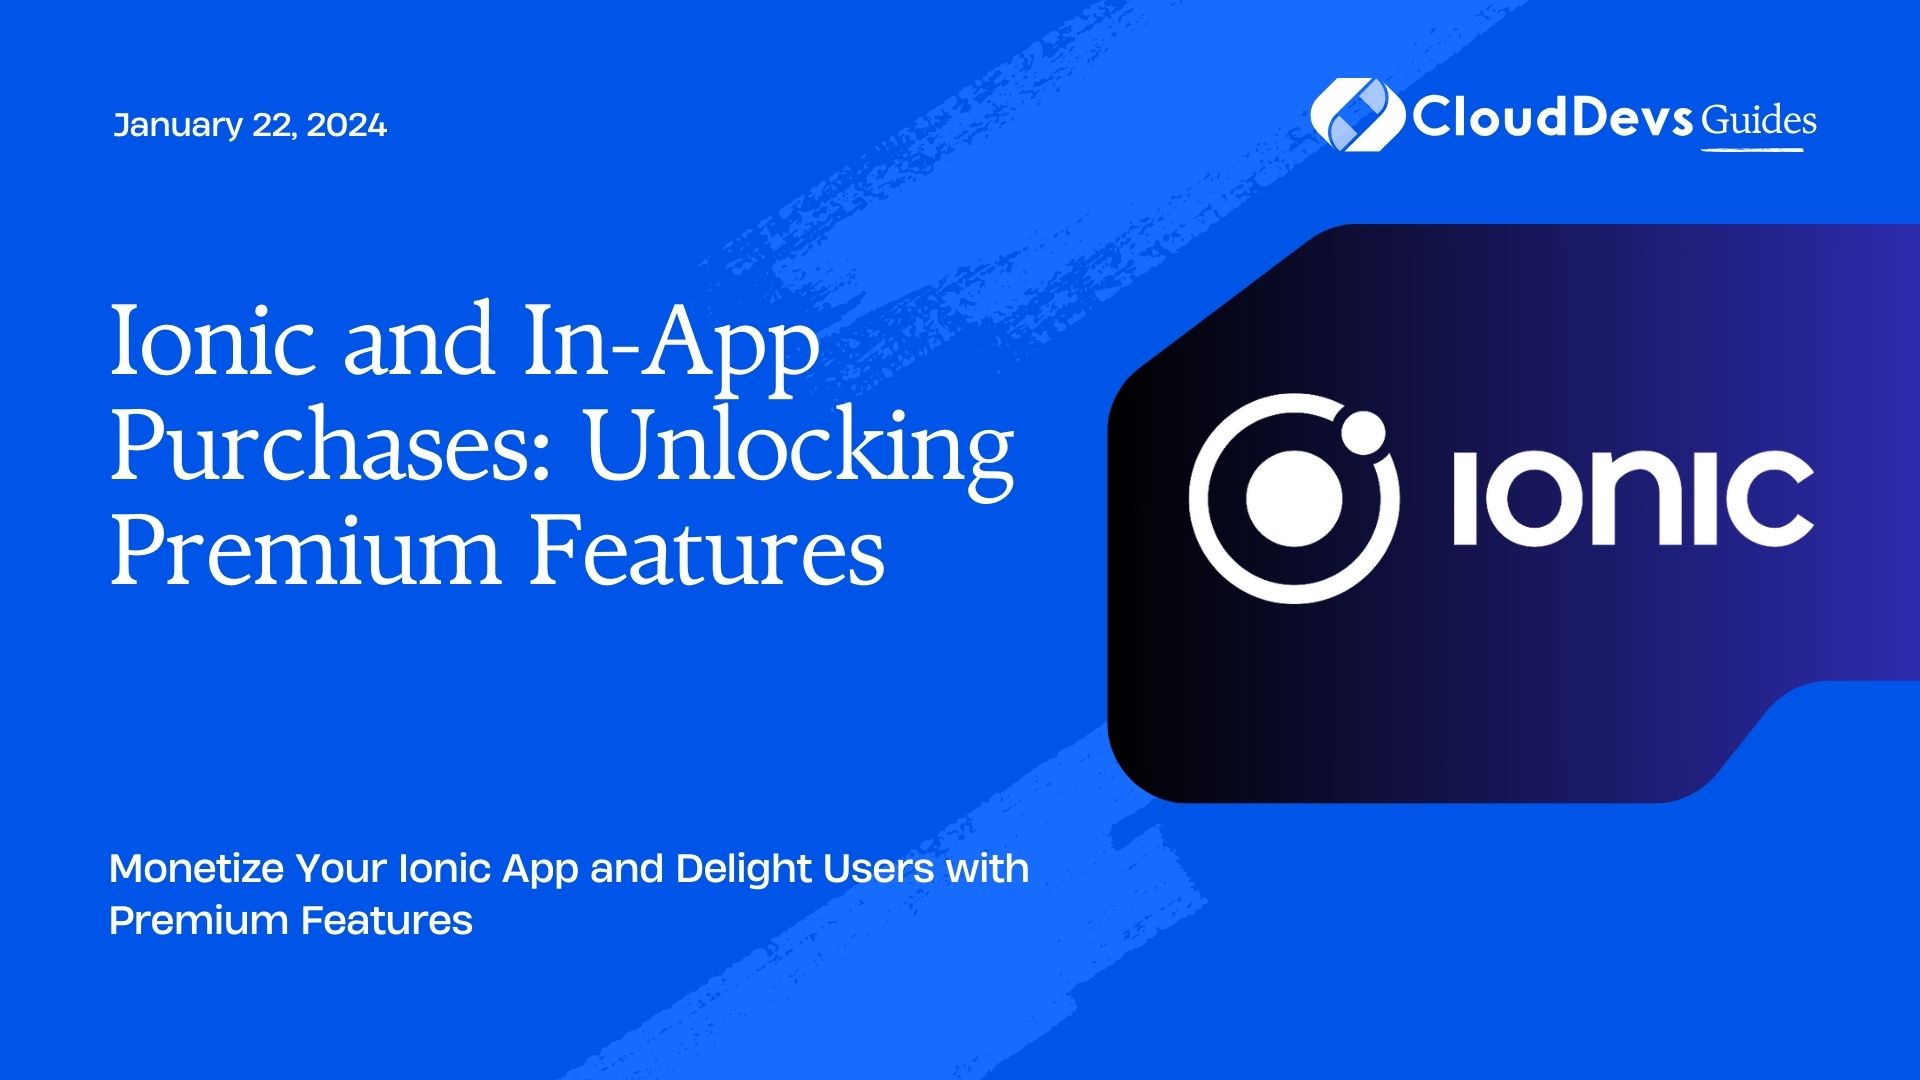 Ionic and In-App Purchases: Unlocking Premium Features